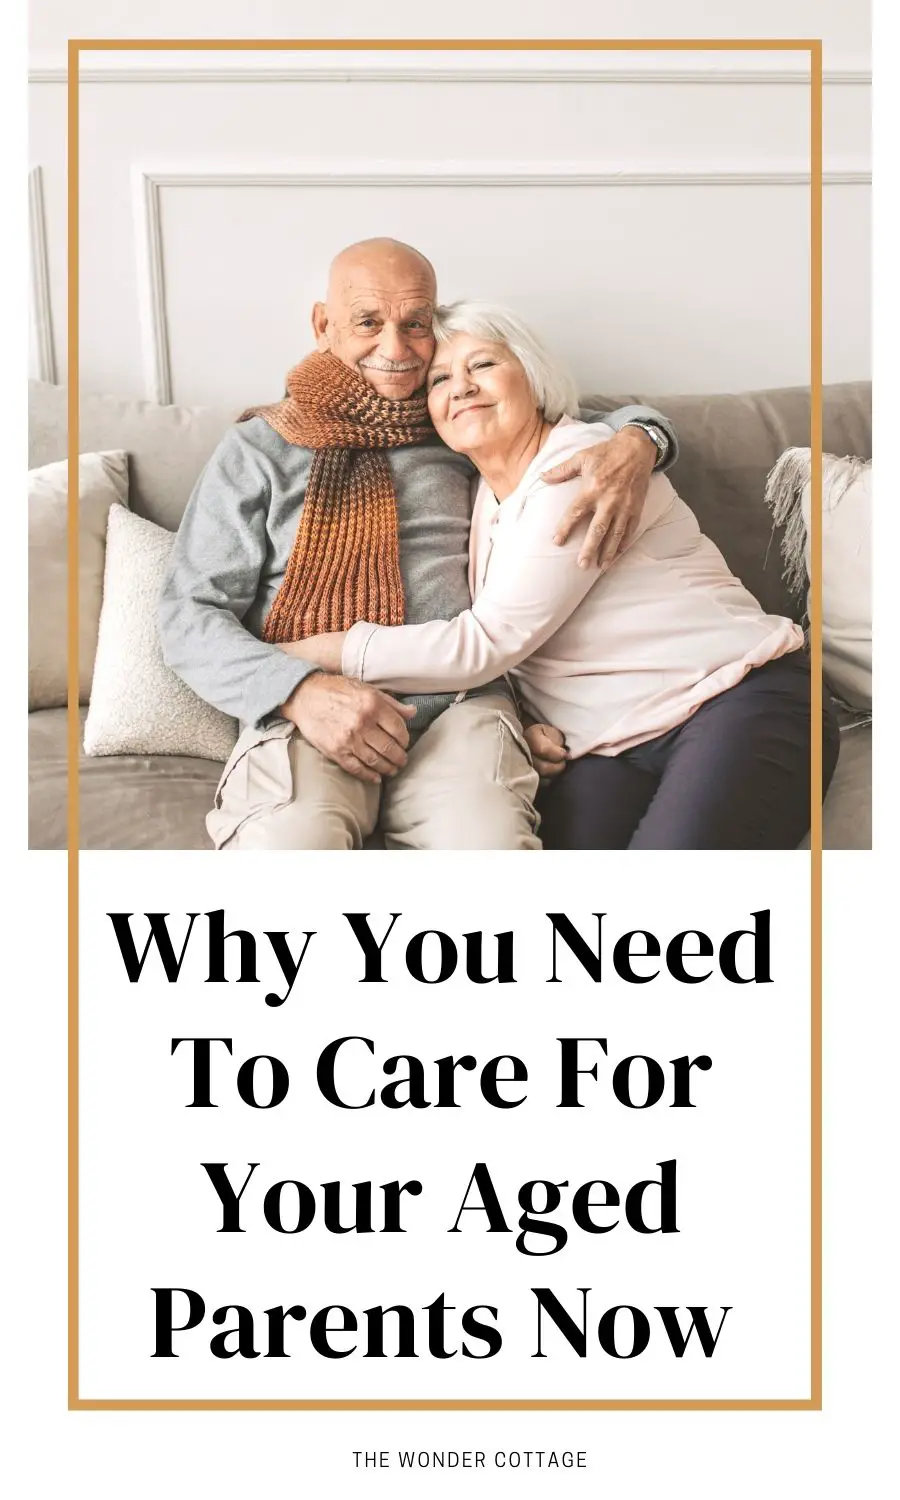 Why You Need To Care For Your Aged Parents Now